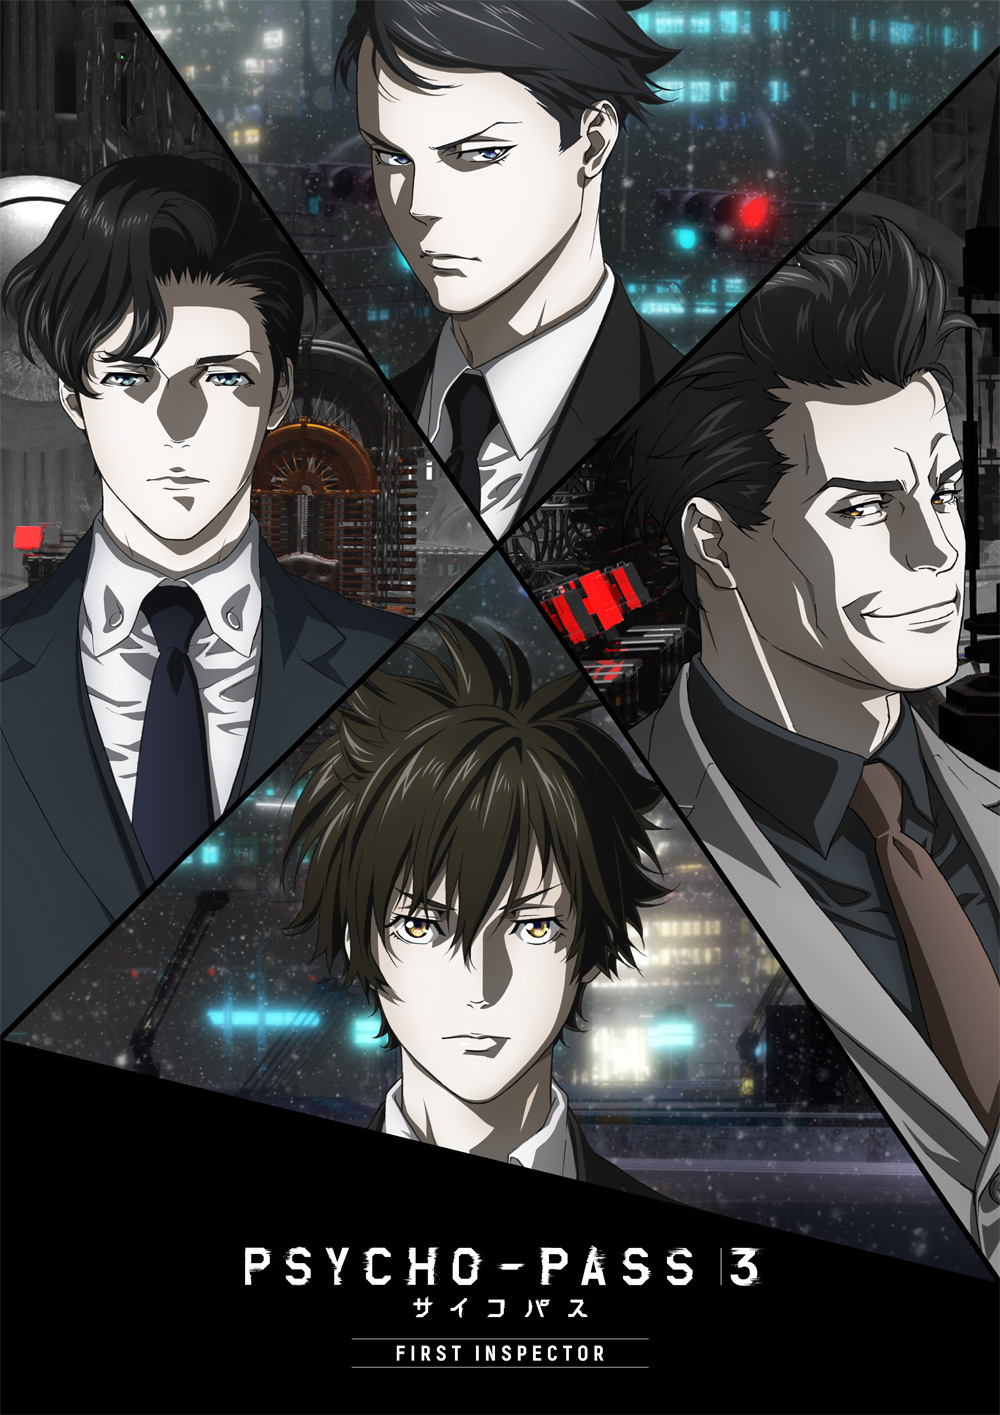 Who Ya Extendedが劇場版 Psycho Pass サイコパス ３ First Inspector の主題歌 Synthetic Sympathy リリース決定 Spice エンタメ特化型情報メディア スパイス